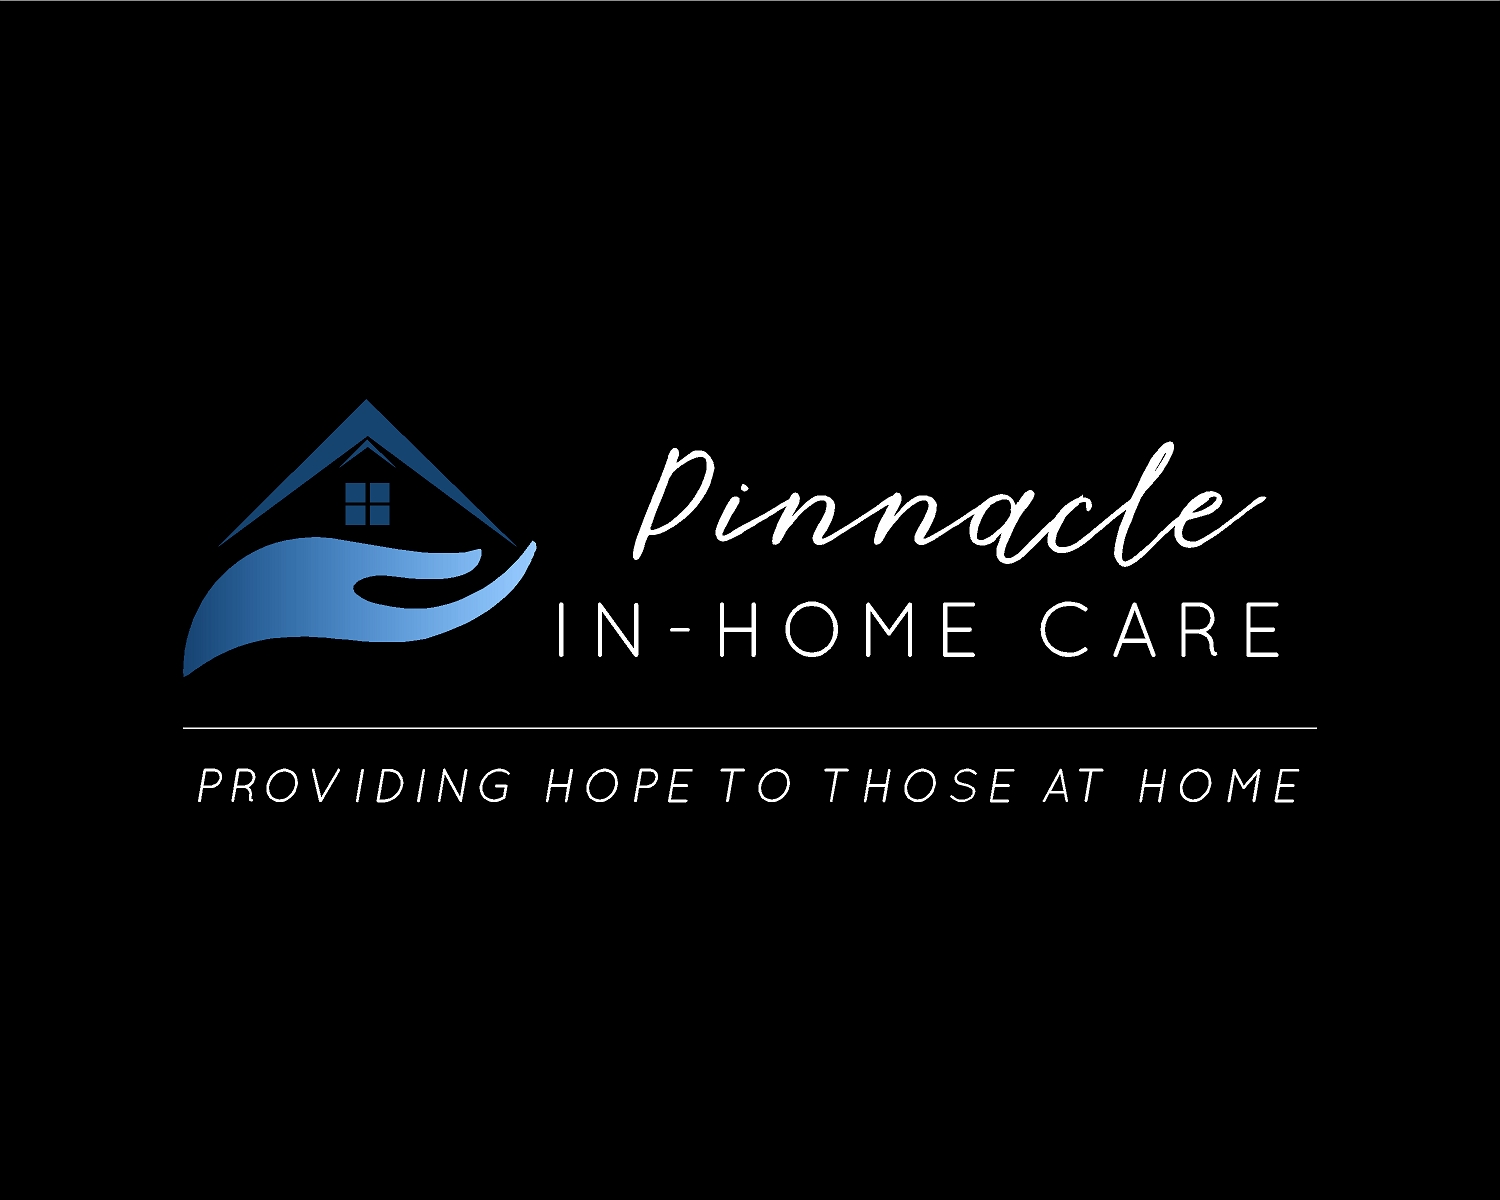 Pinnacle In-Home Care